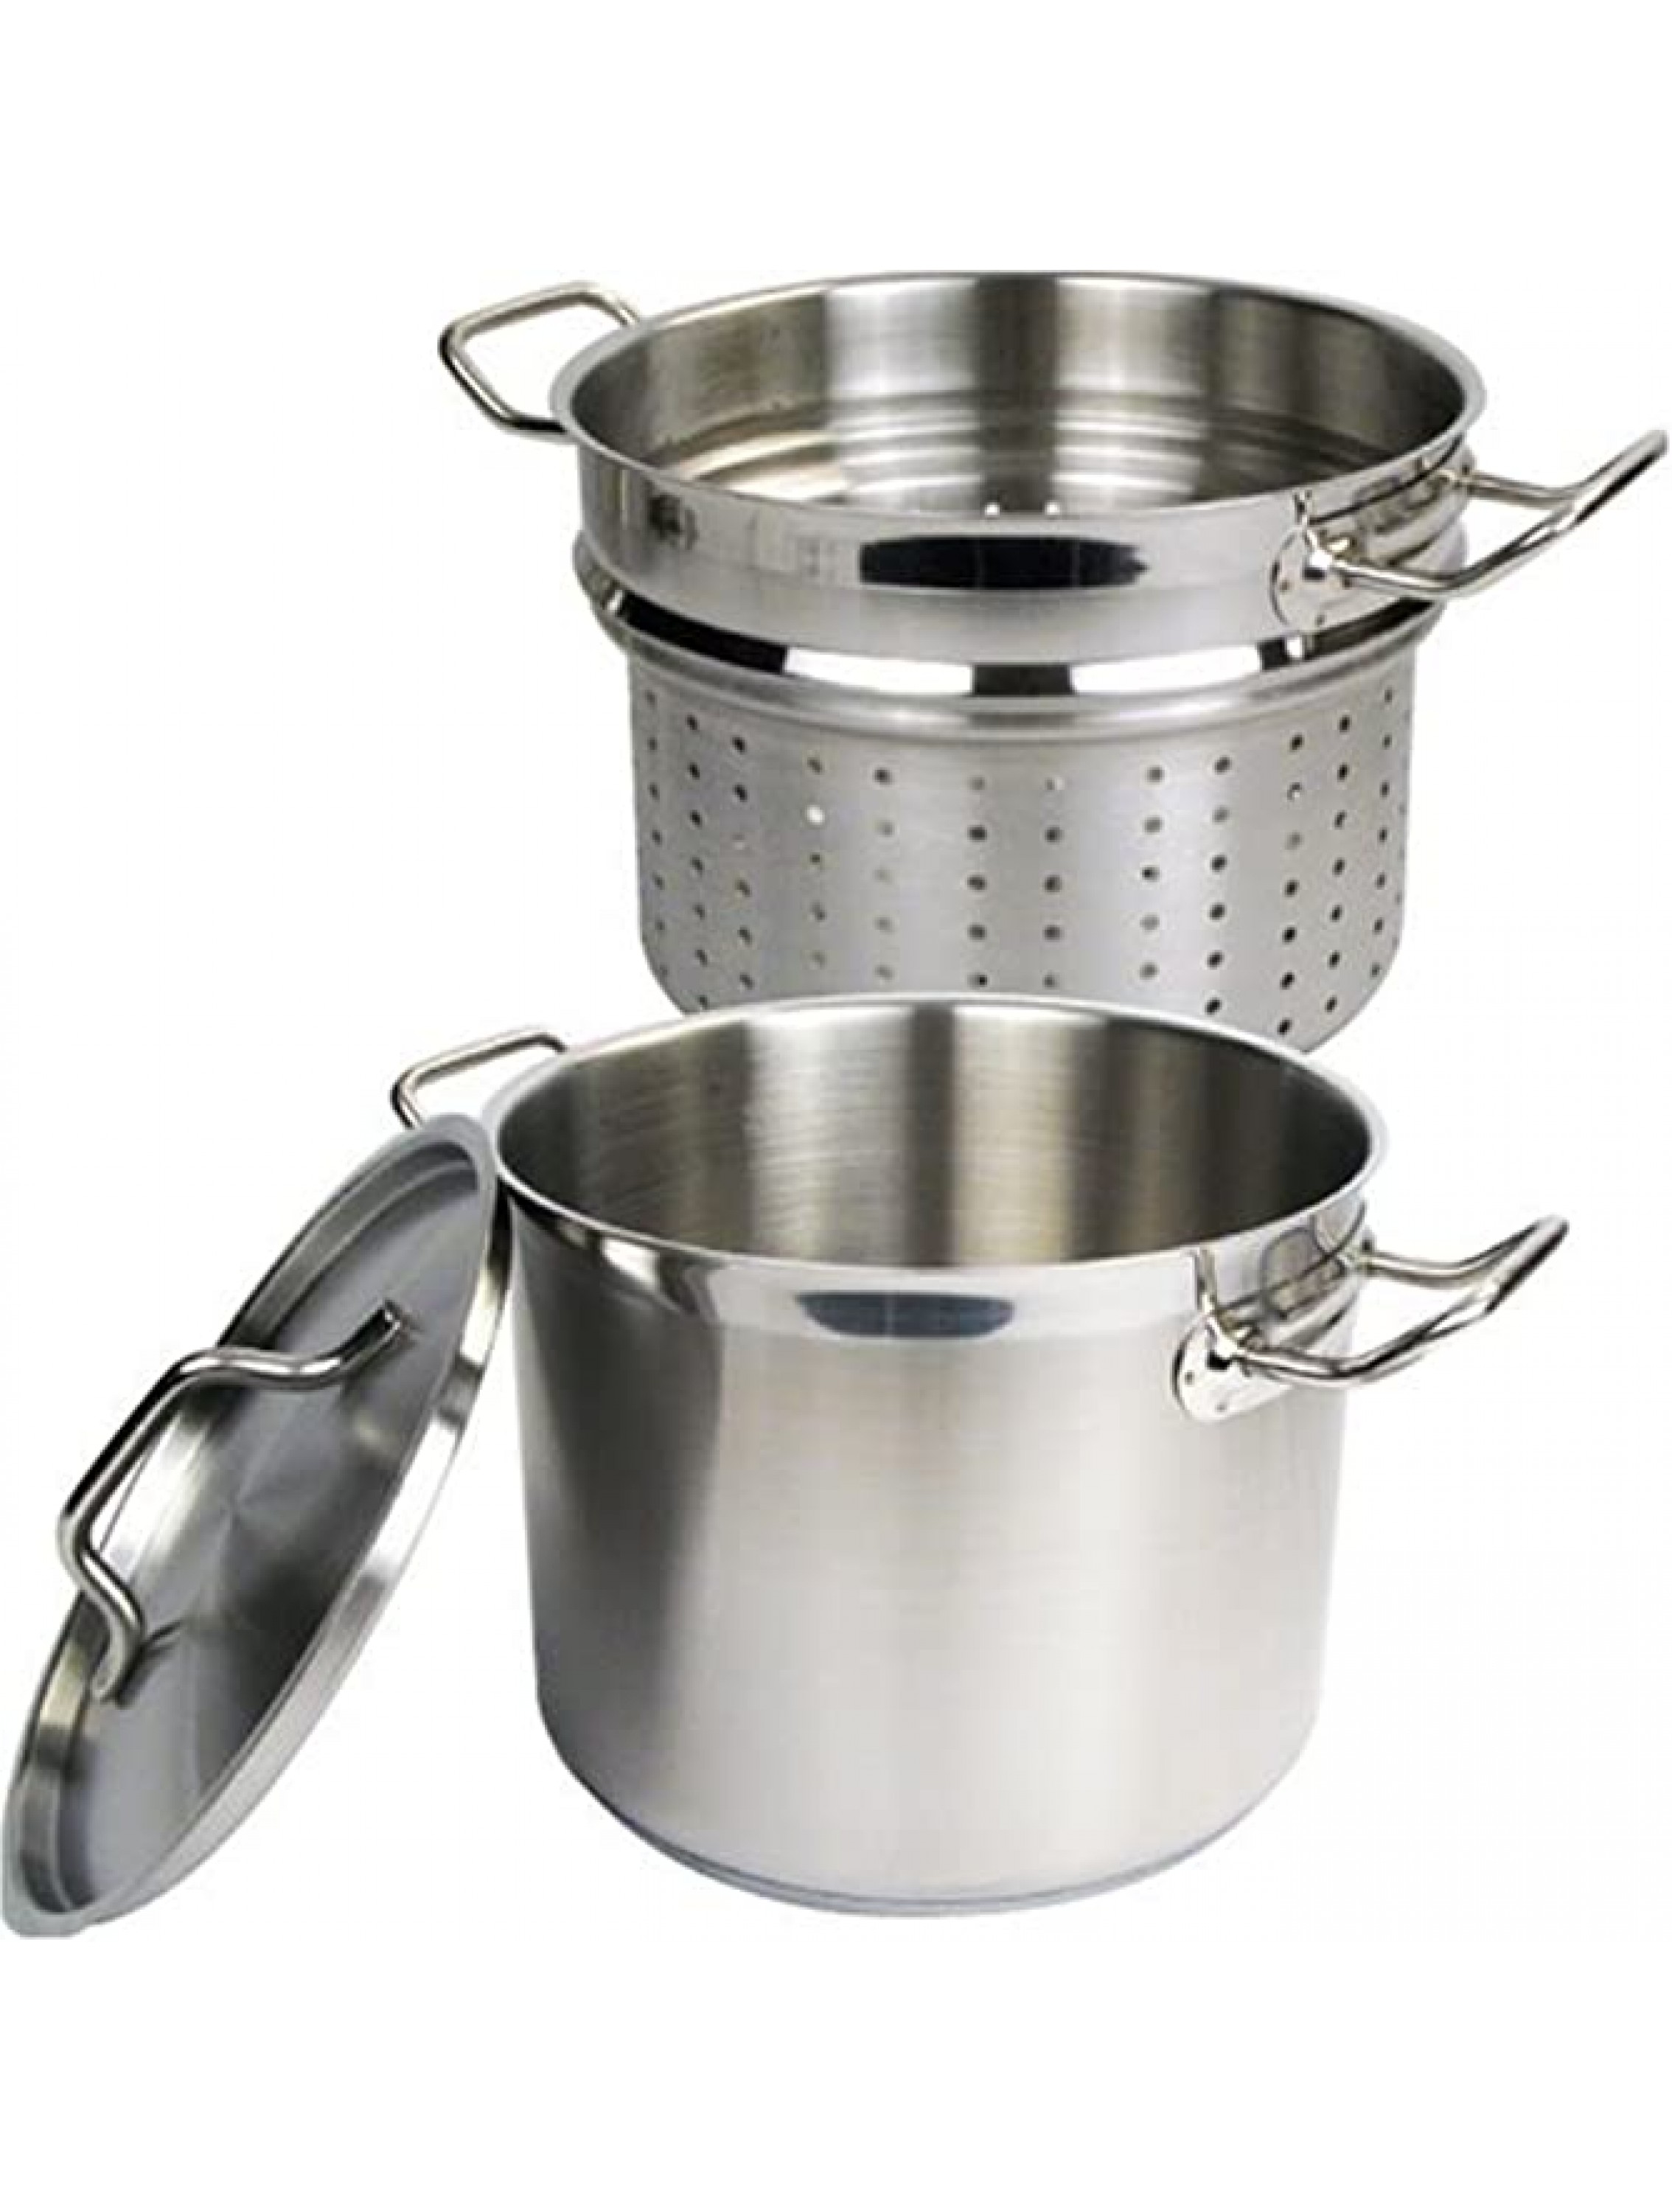 Winware Stainless 8 Quart Steamer Pasta Cooker with Cover - BDNQH41WL